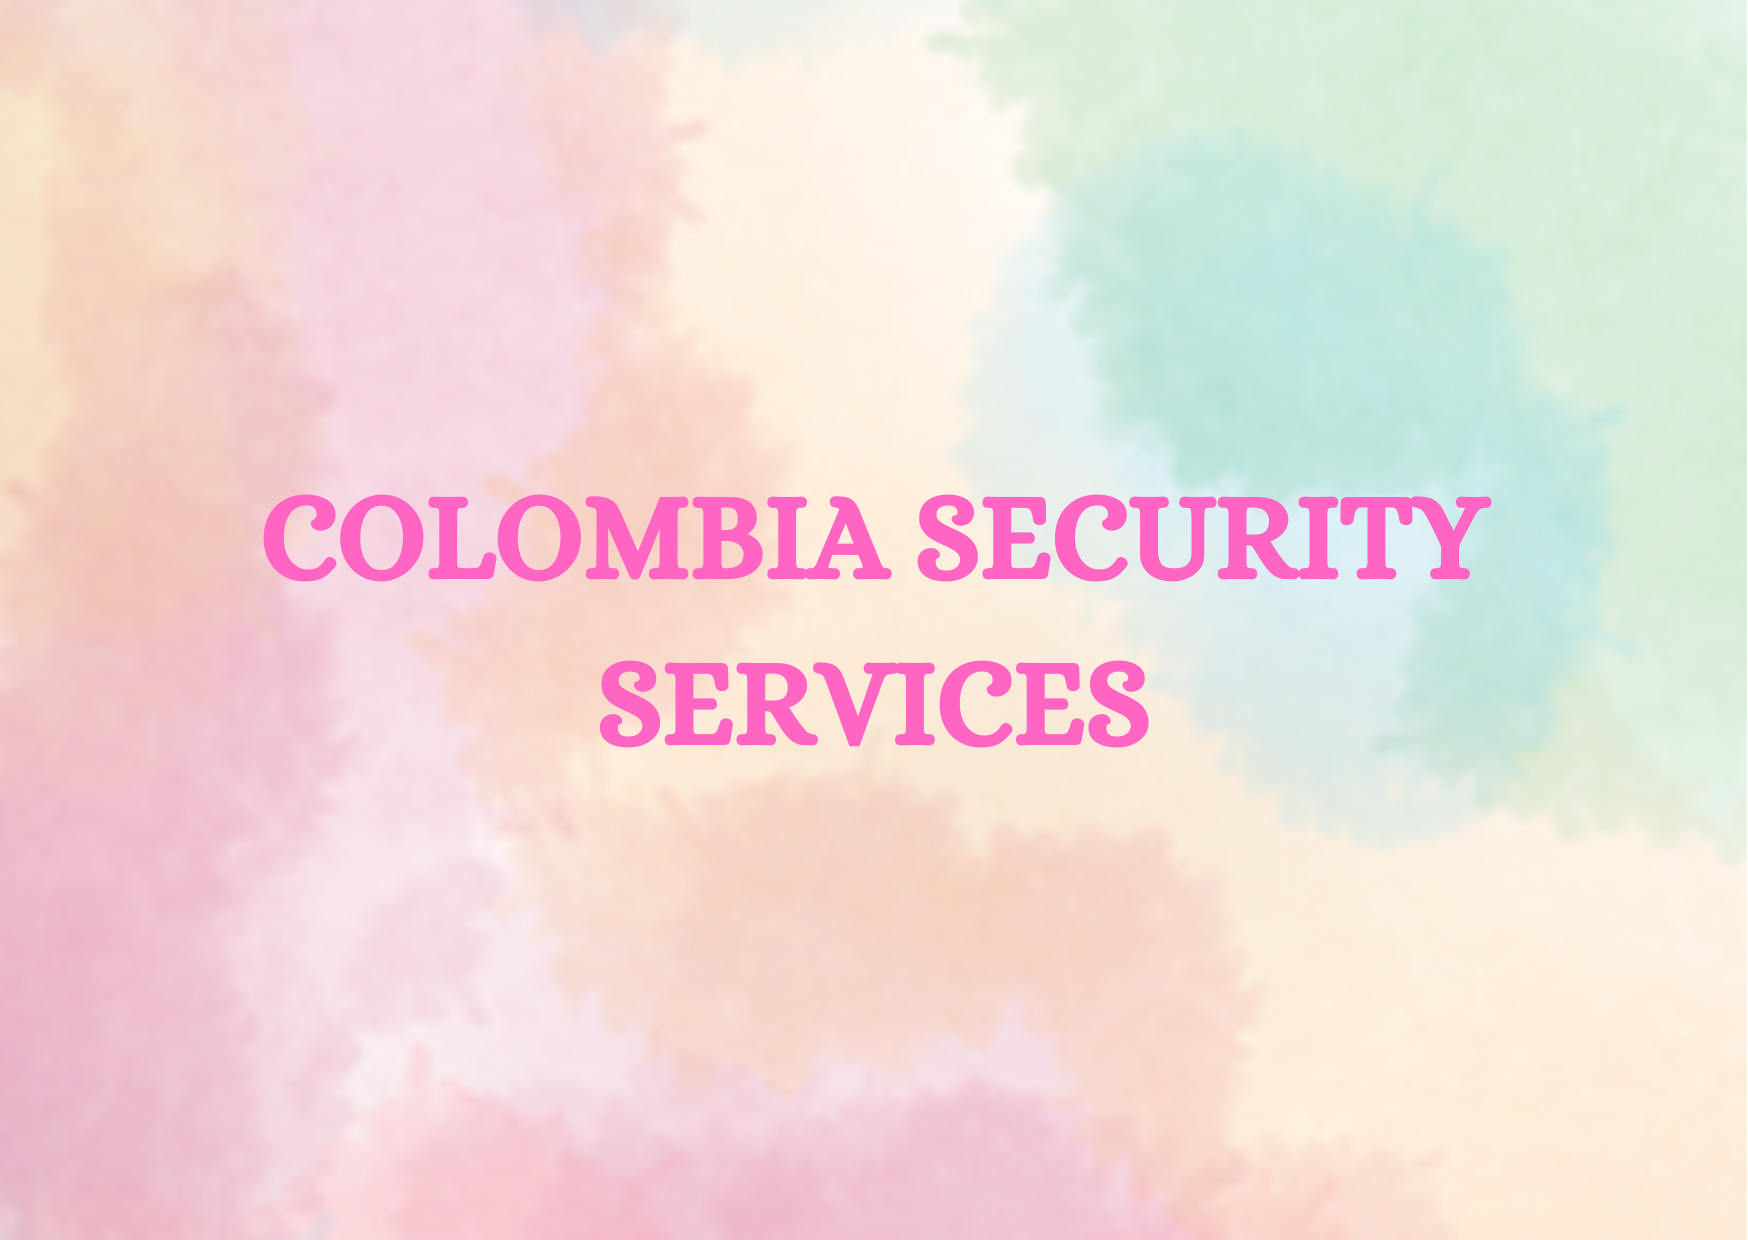  COLOMBIA SECURITY SERVICES 